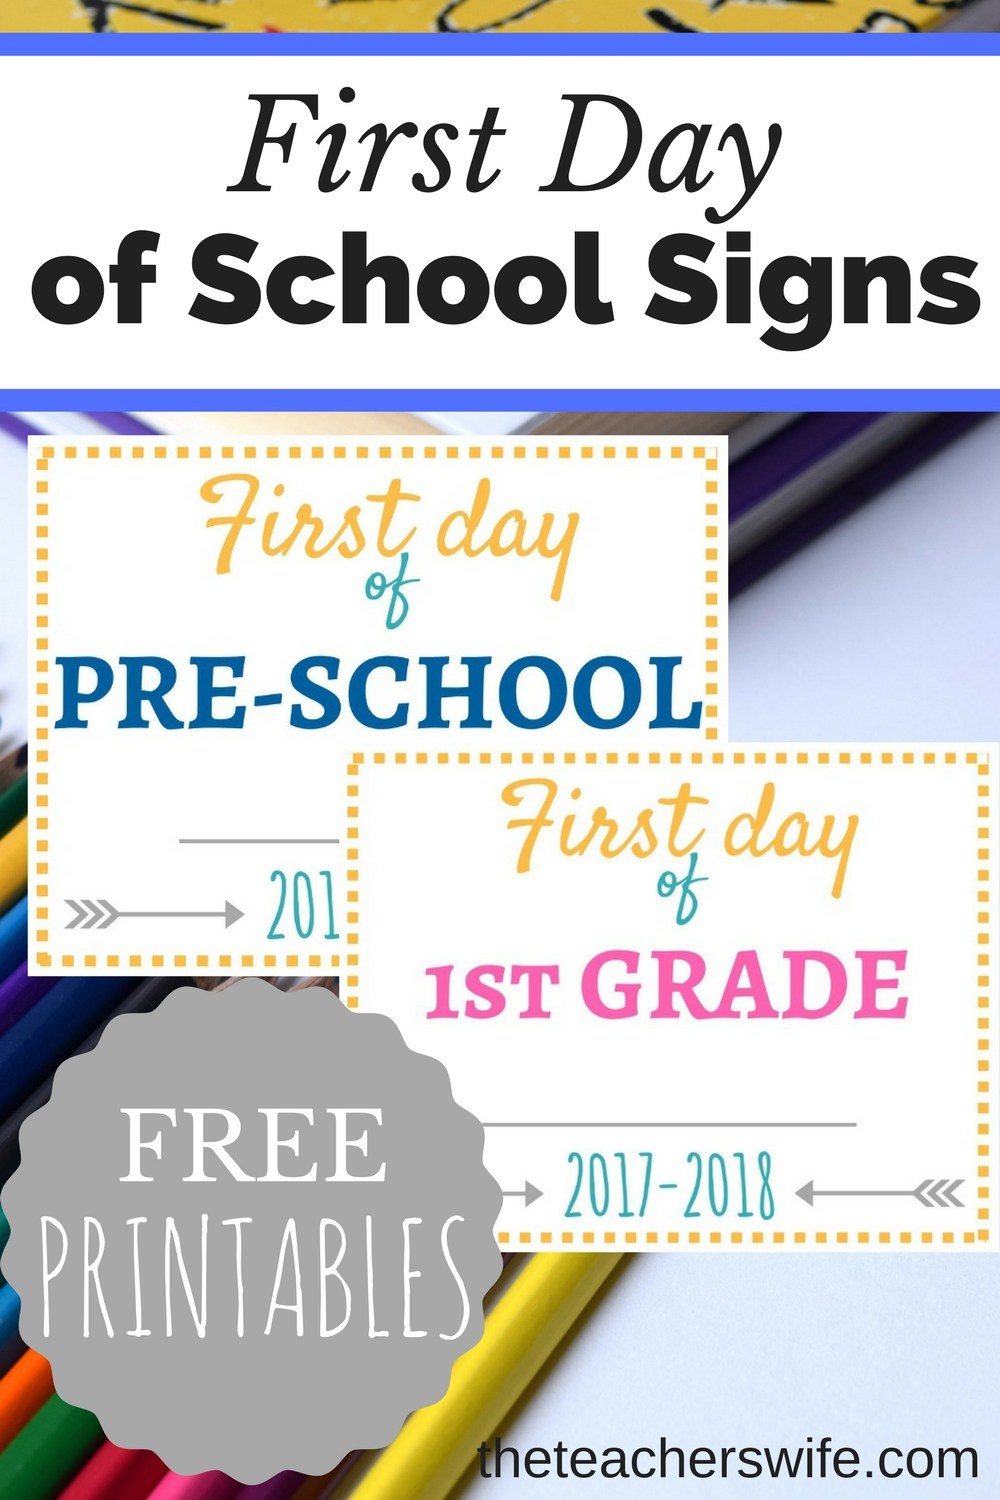 Free Printable First Day Of School Signs - Money Saving Mom® : Money - Free Printable First Day Of School Signs 2017